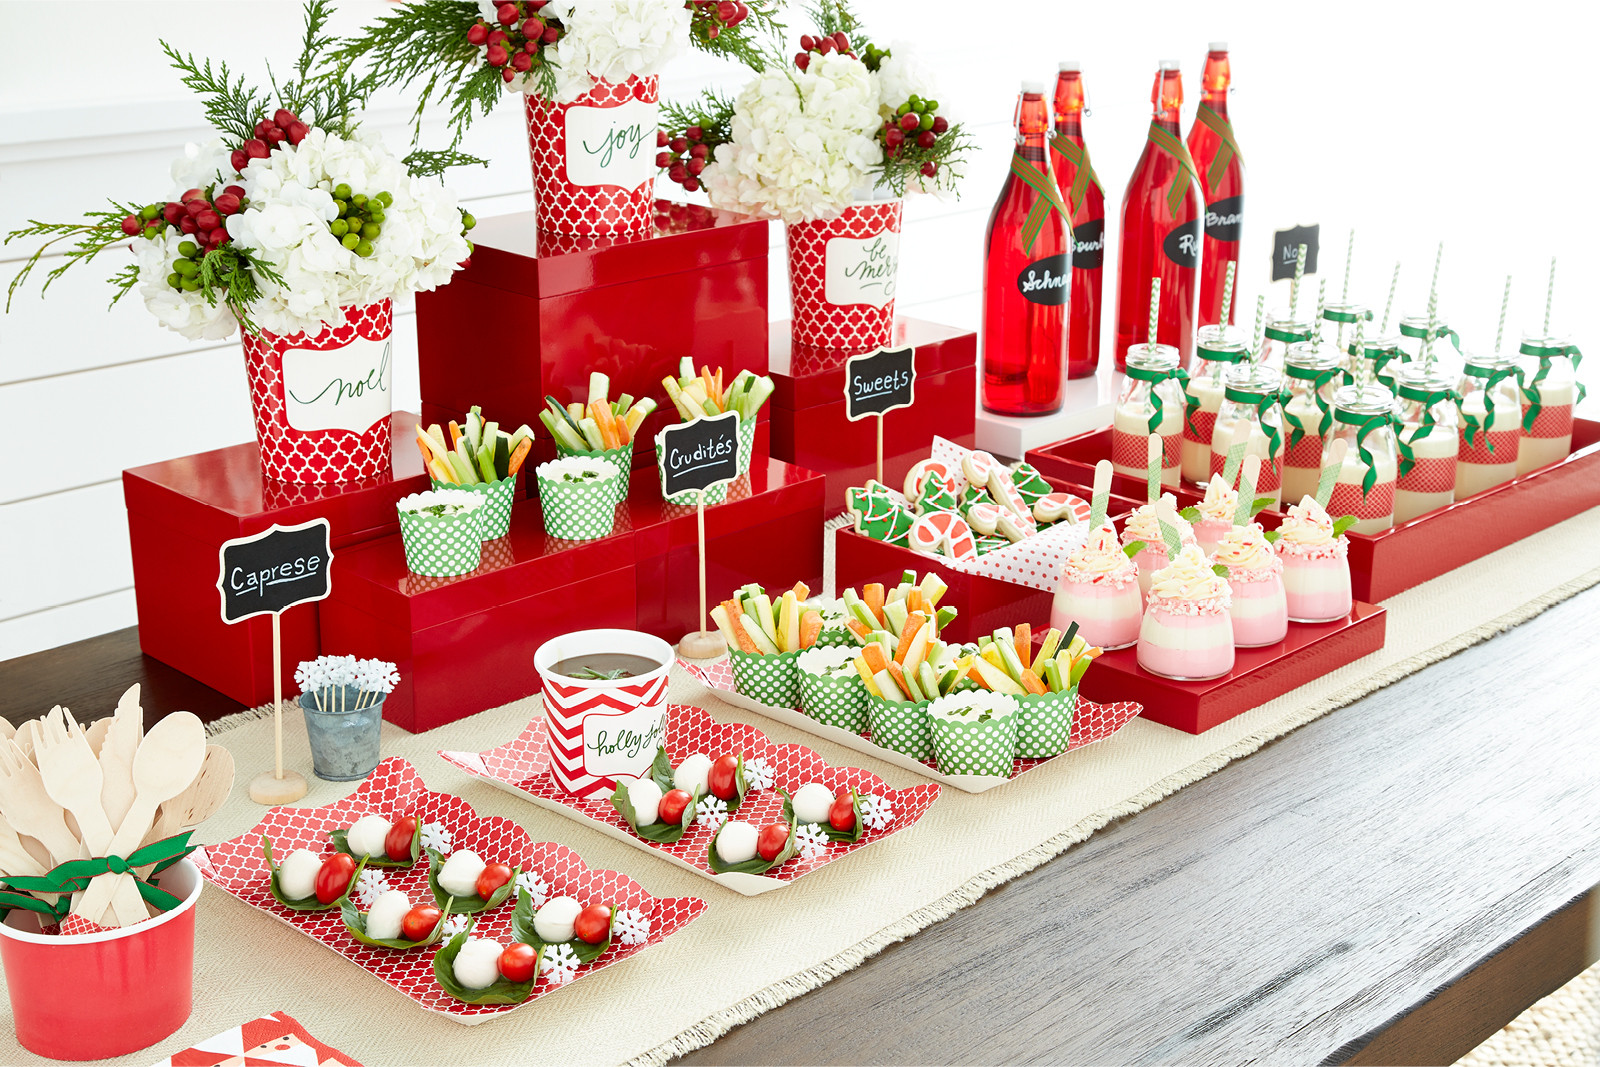 Party Food Table Ideas
 A Very Merry Table of Treats